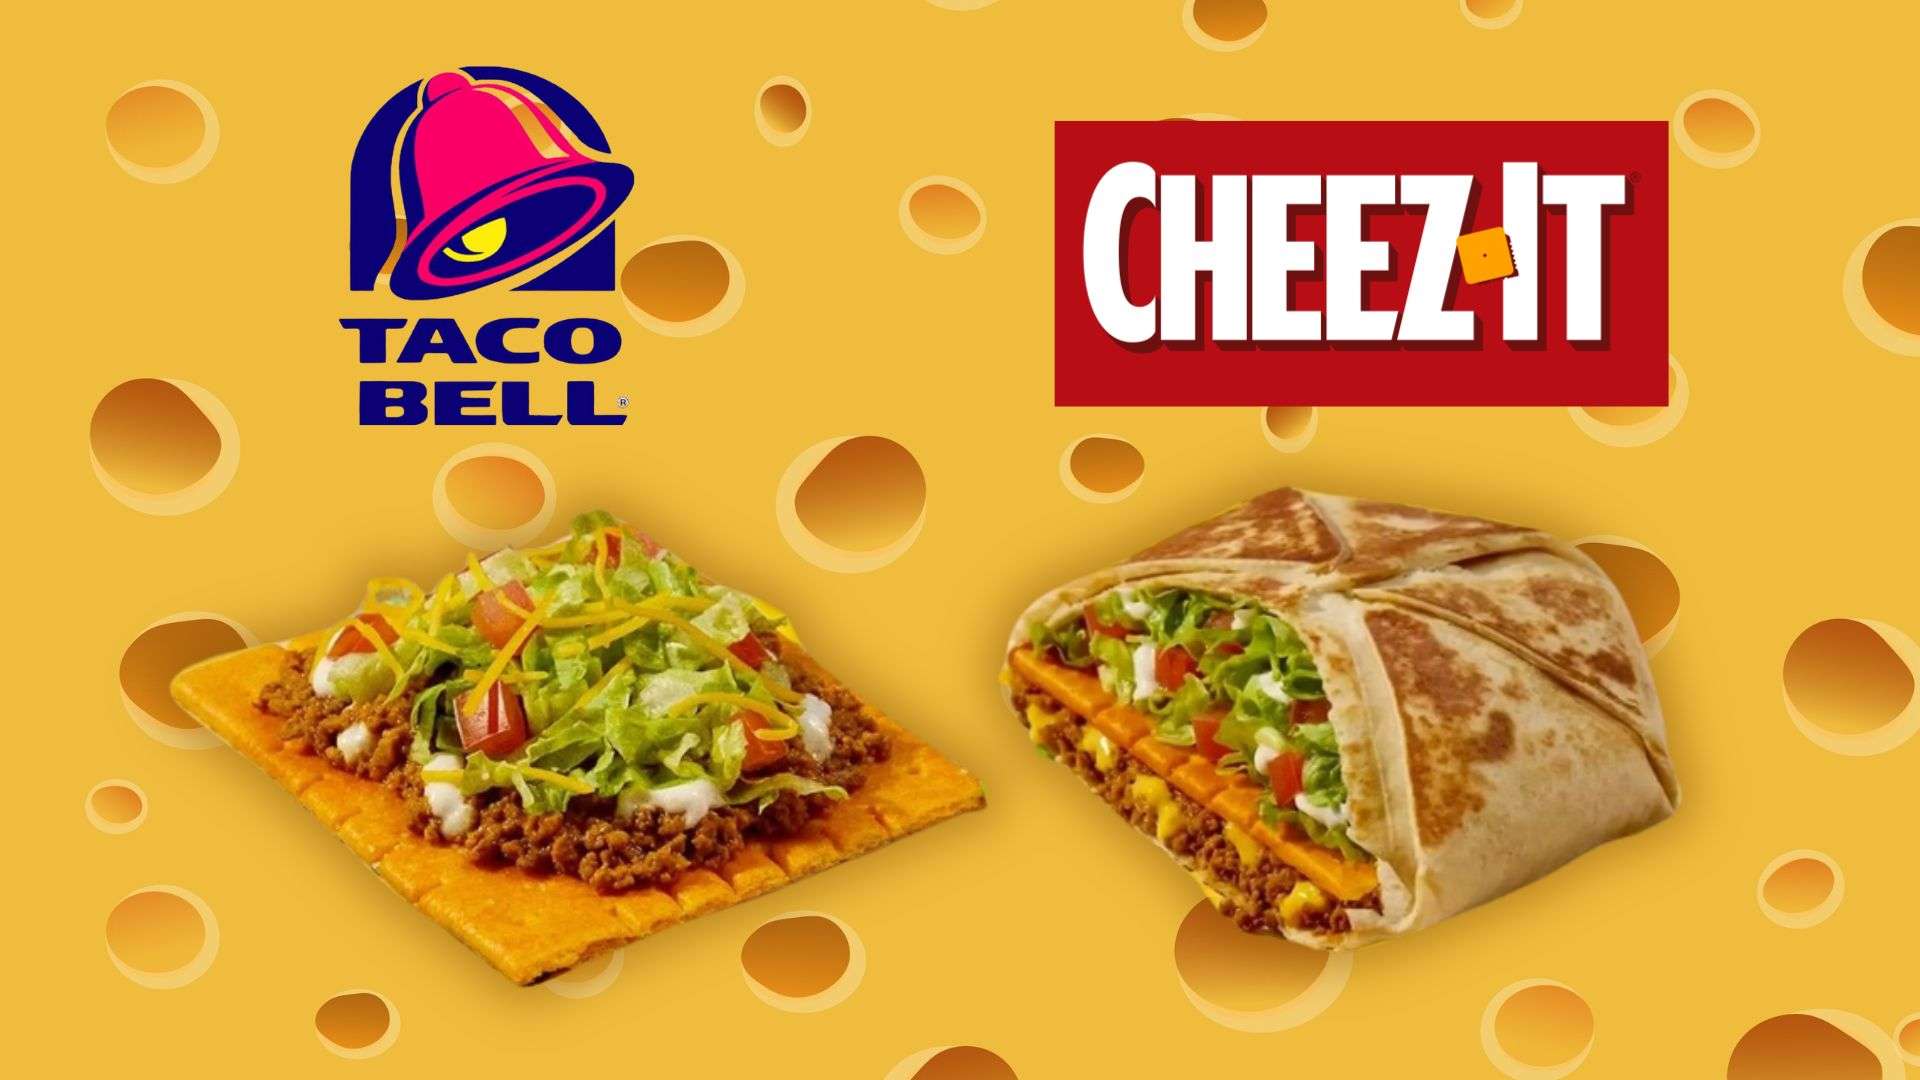 Taco Bell x Cheez-It collab